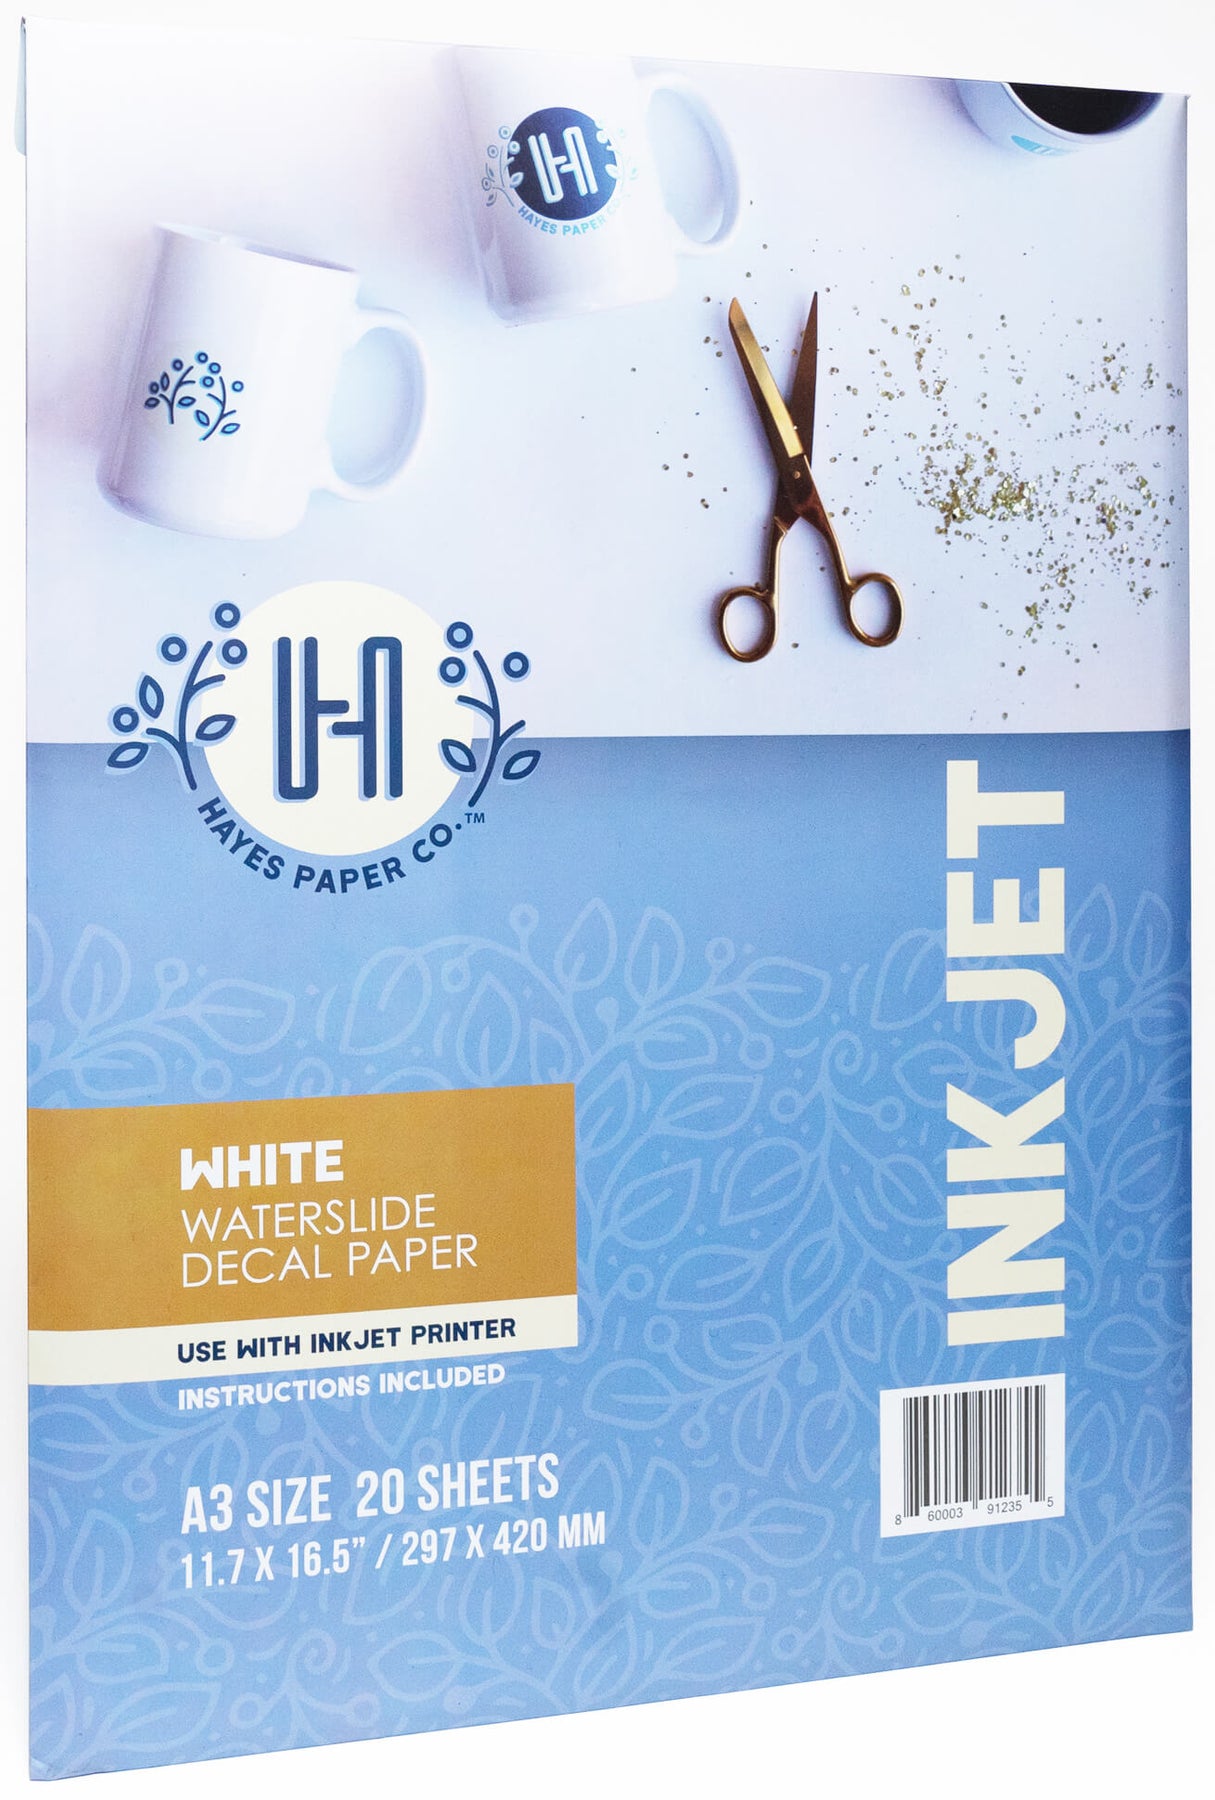 Hayes Paper, Waterslide Decal Paper Inkjet Clear 20 Sheets Premium Water-Slide Transfer Transparent, Printable, A4 Size